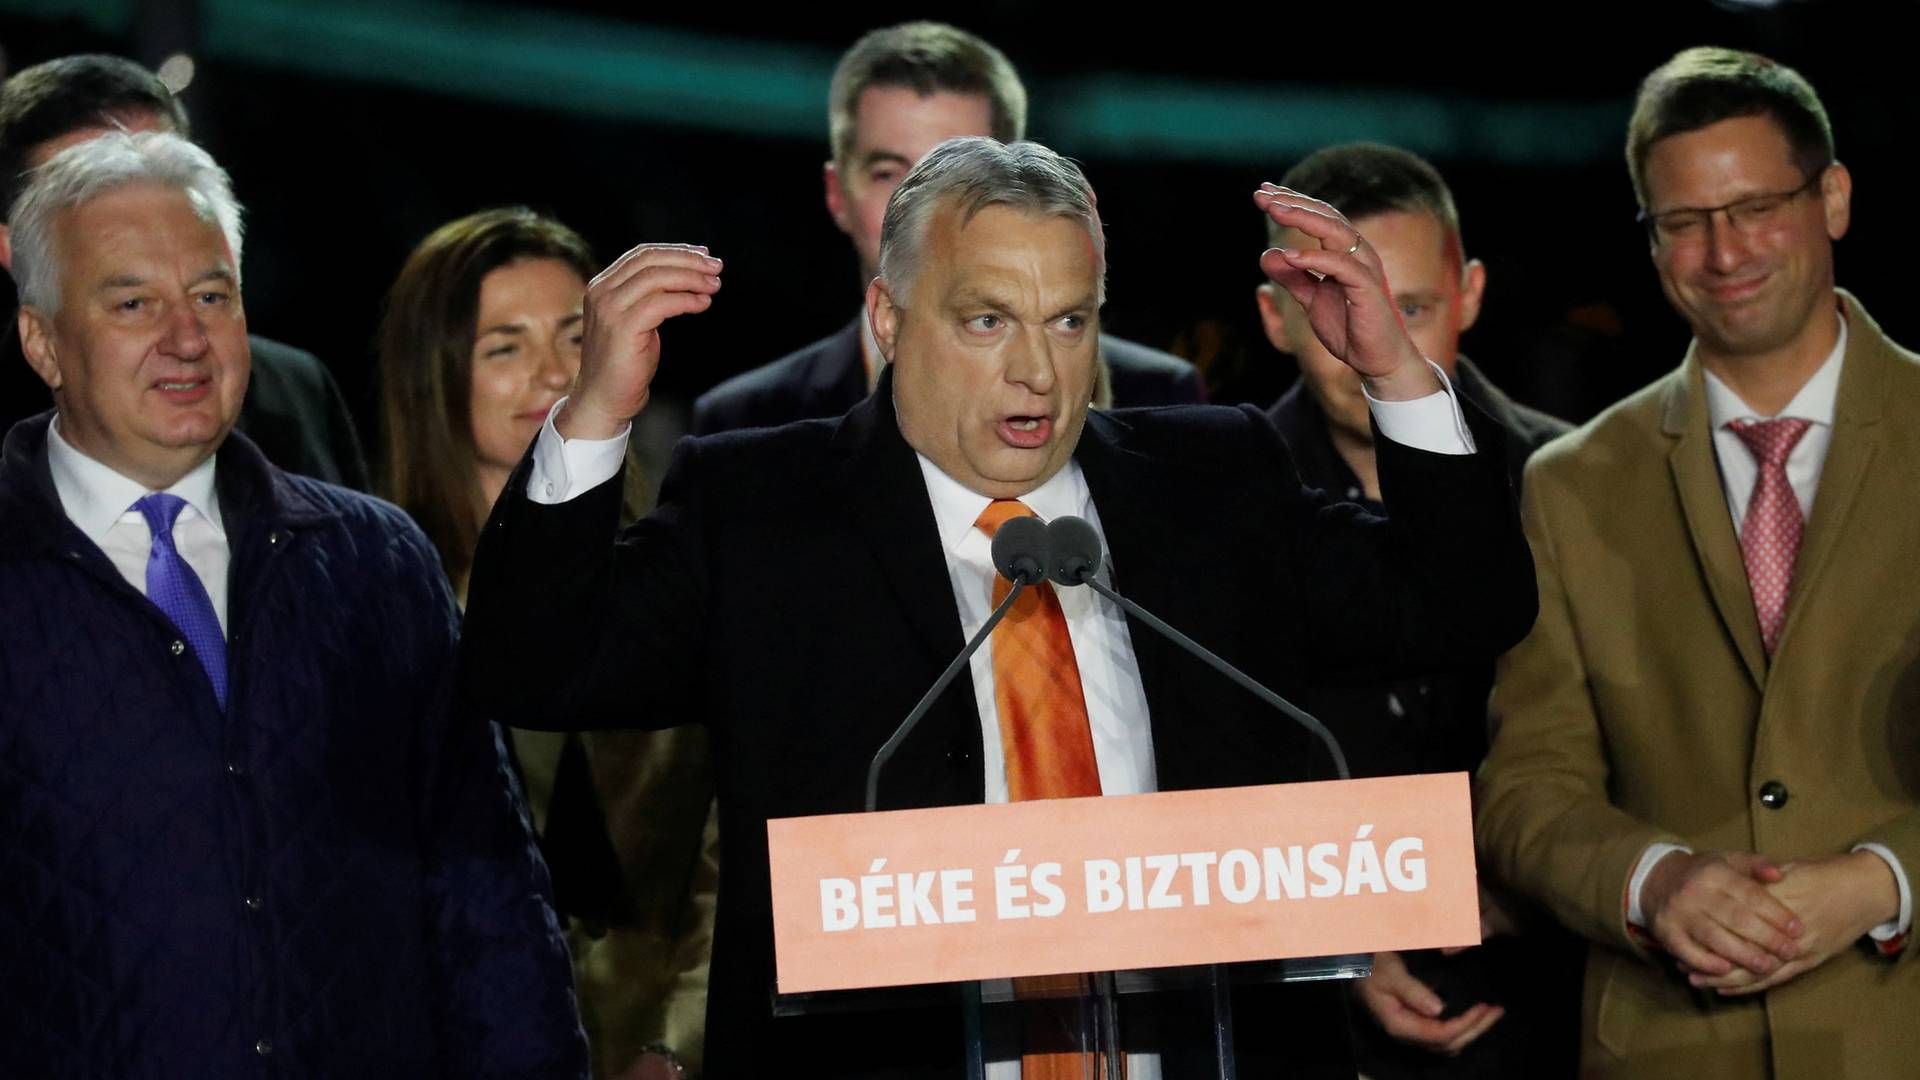 Viktor Orban's emphatic election victory in Hungary could cause division in the EU on further sanctions against Russia. | Photo: BERNADETT SZABO/REUTERS / X02784